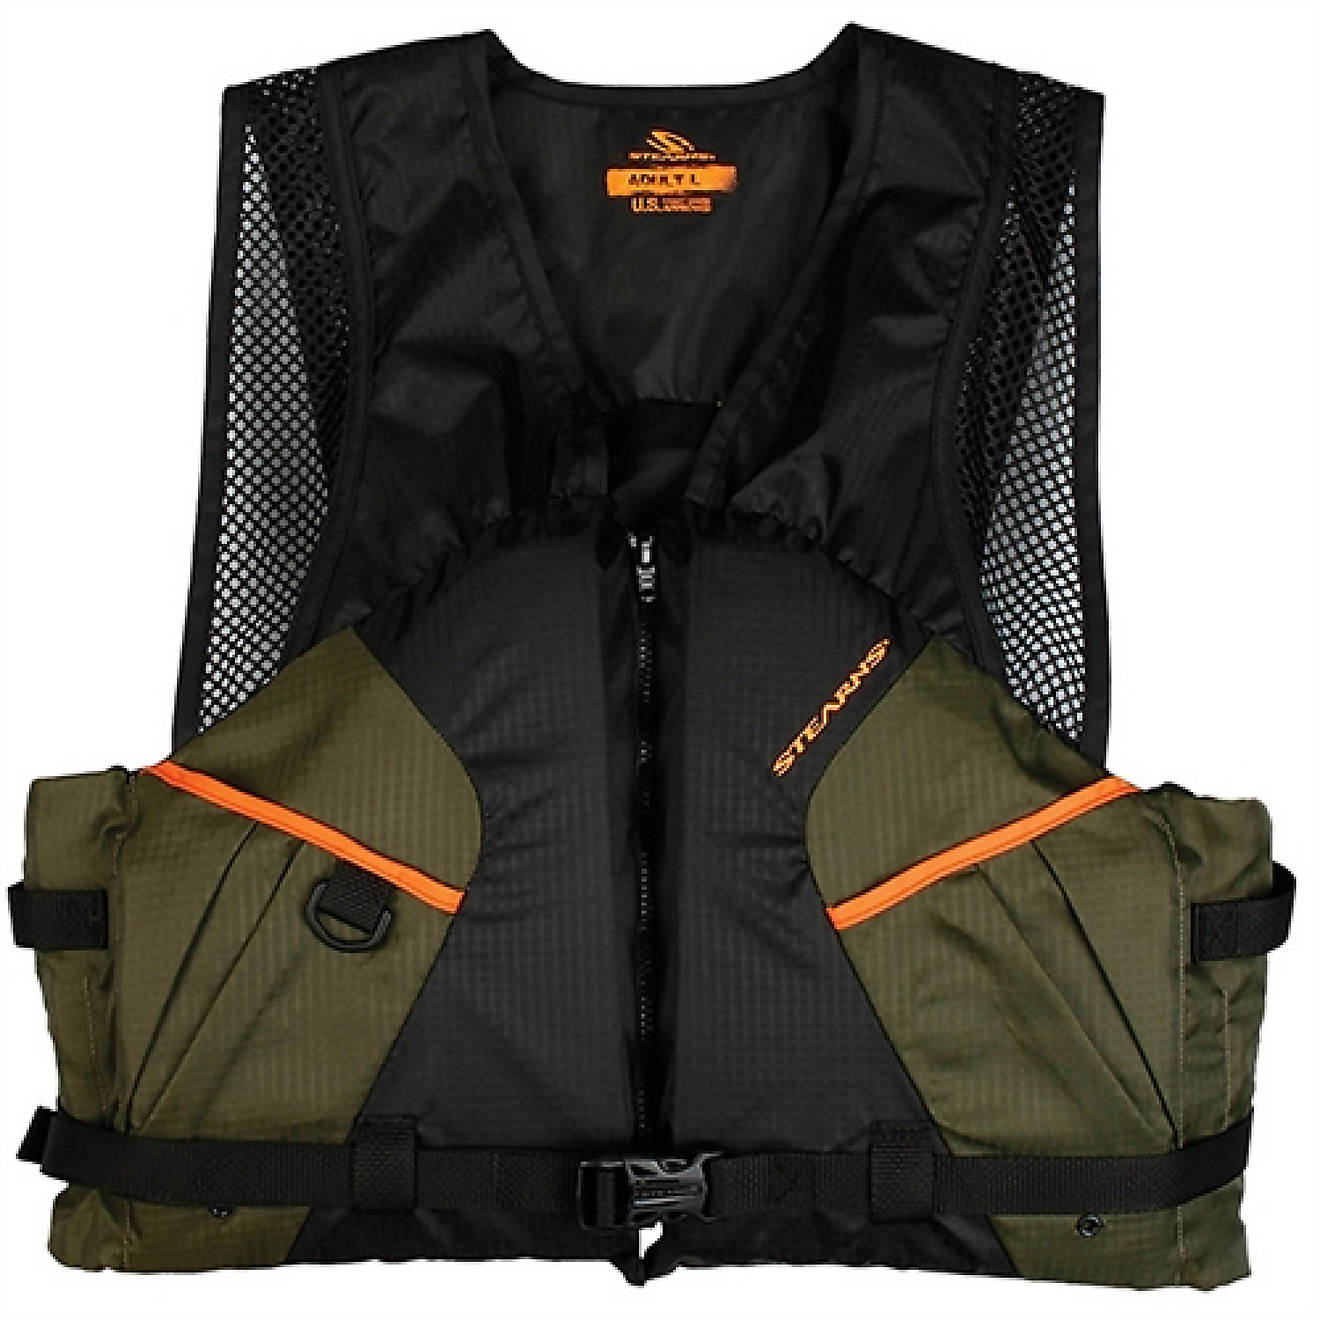 Stearns Comfort Series 2220 Fishing Life Vest                                                                                    - view number 1